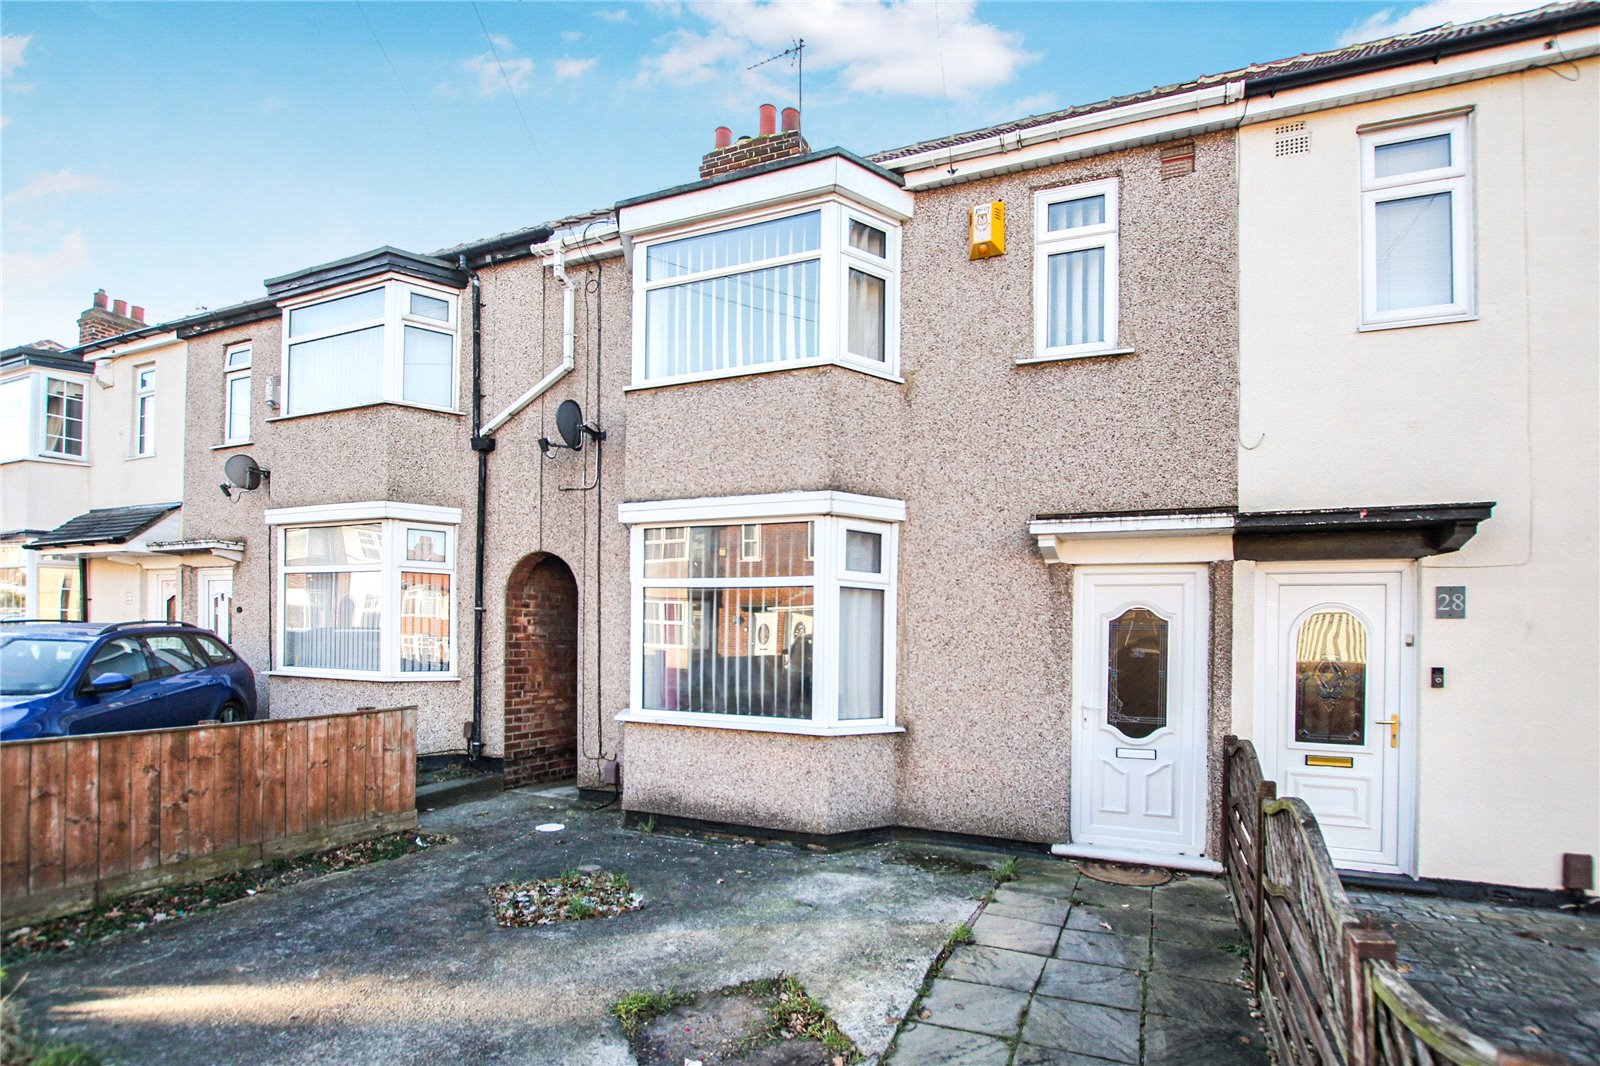 3 bed house for sale in Downside Road, Acklam - Property Image 1